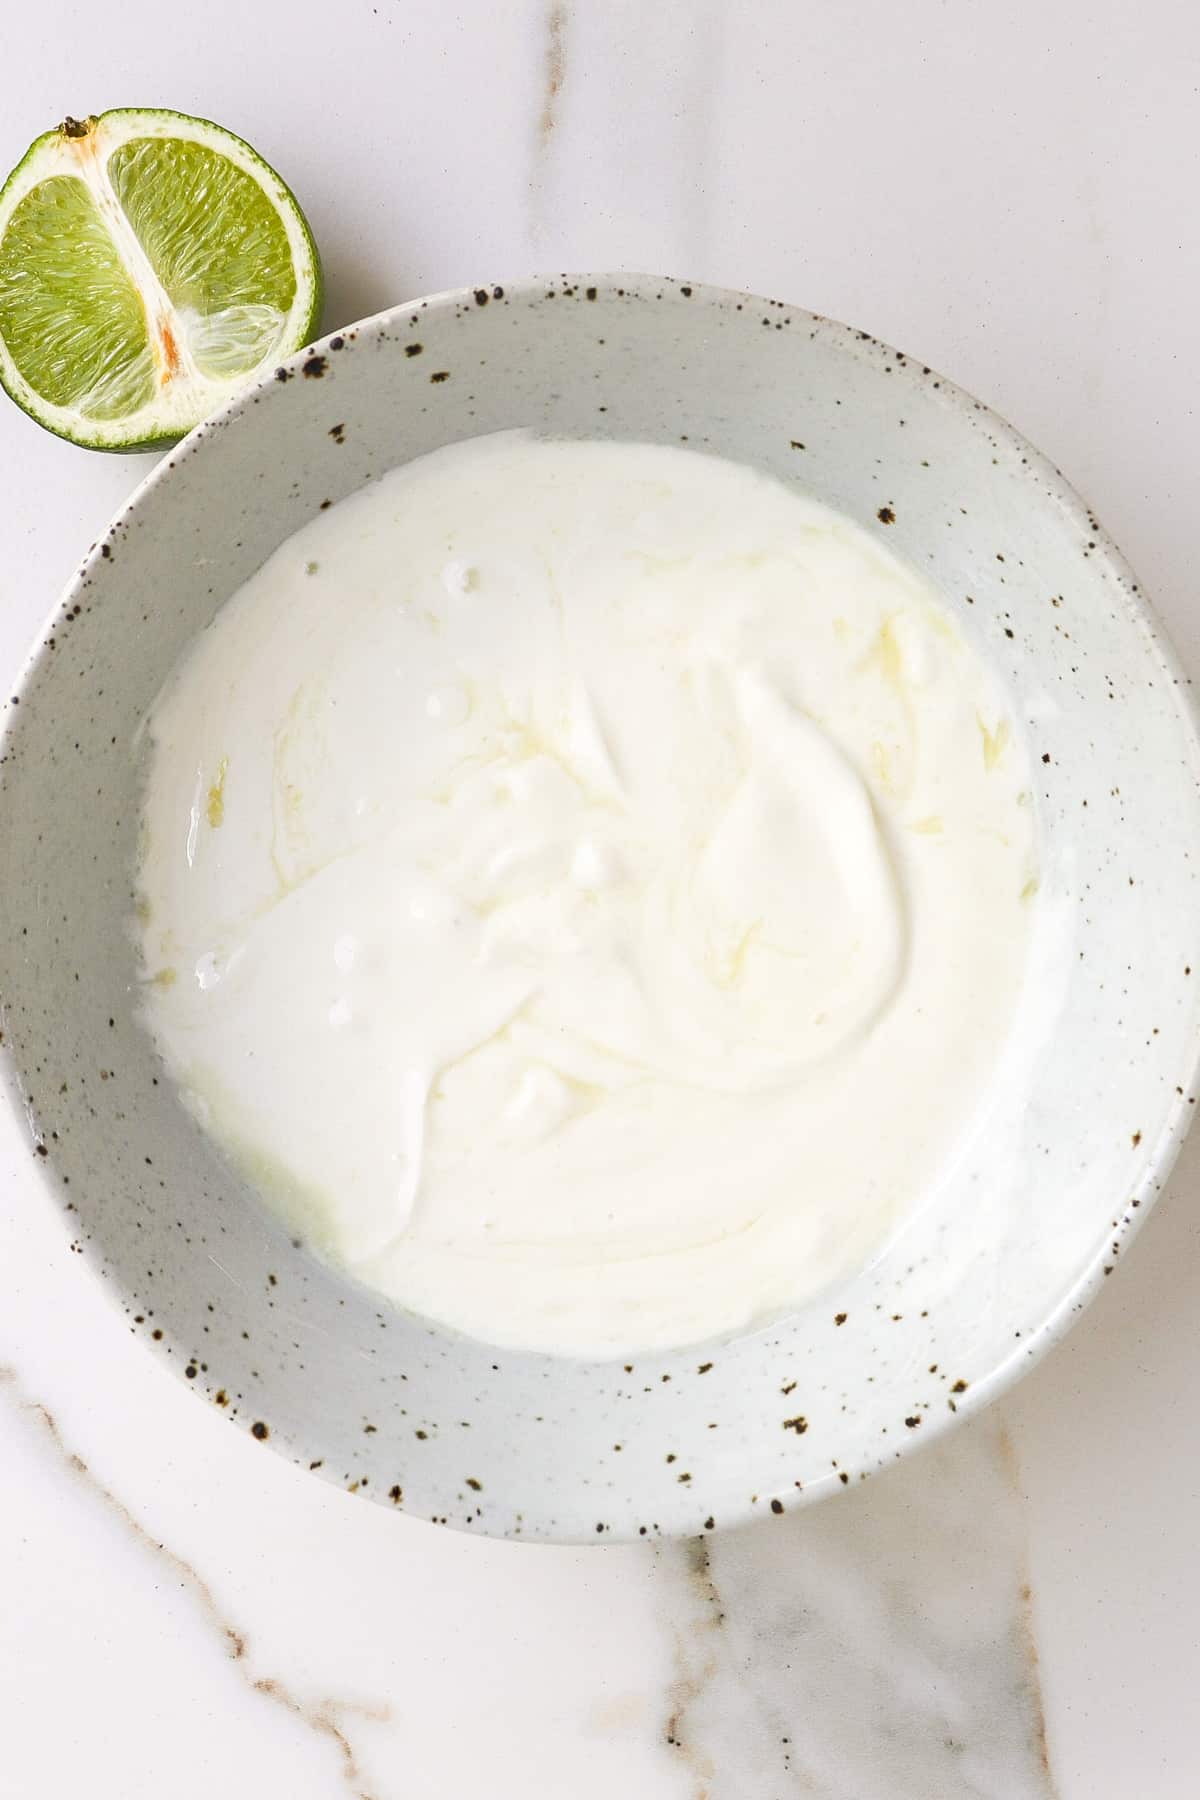 Yoghurt sauce in a bowl with a half a lime on the side.